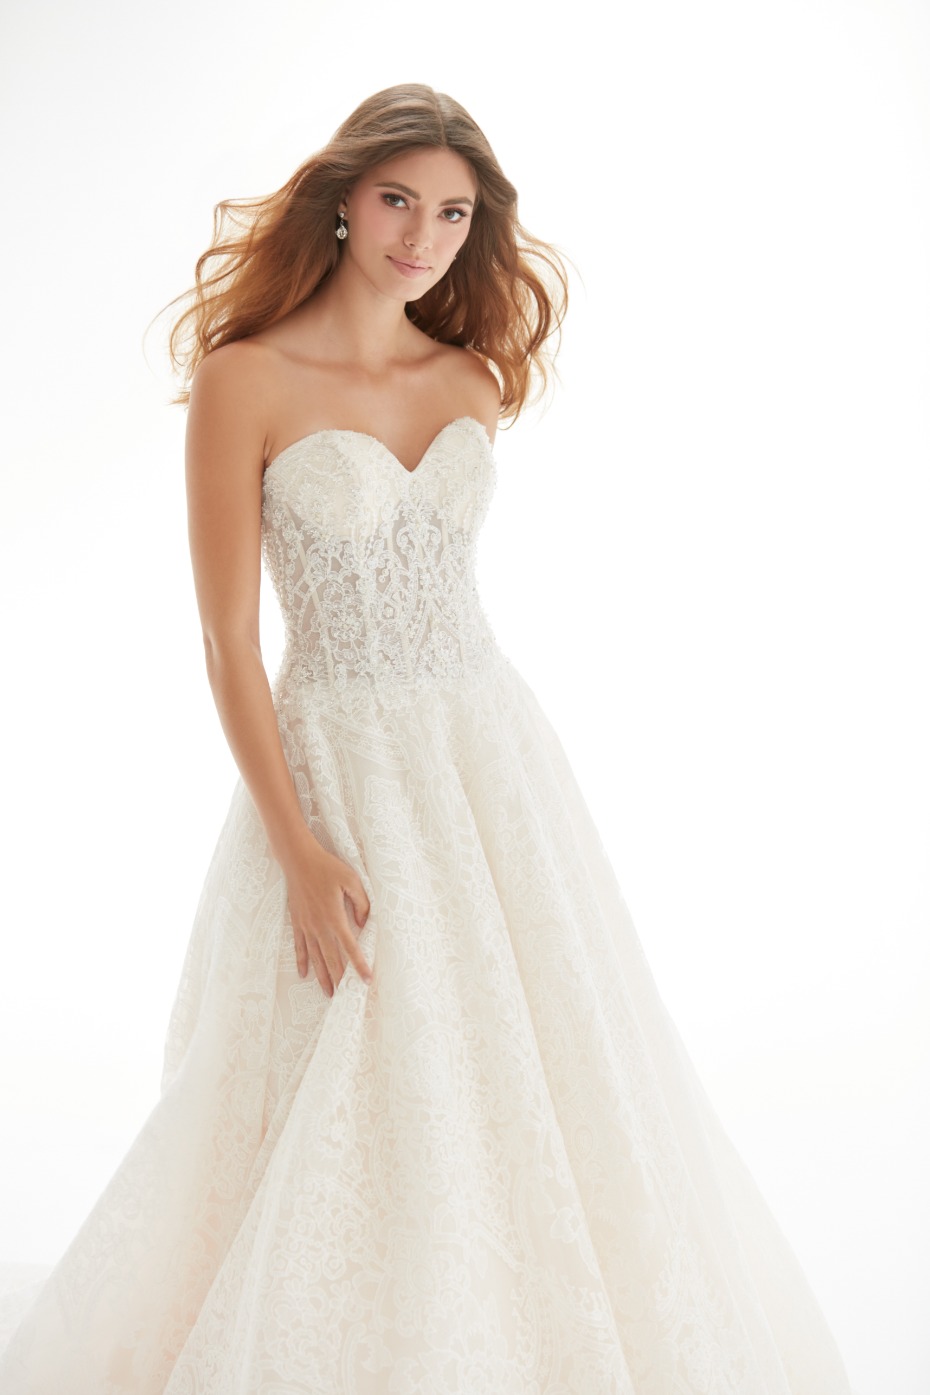 Lace gown from Allure Bridals Collection